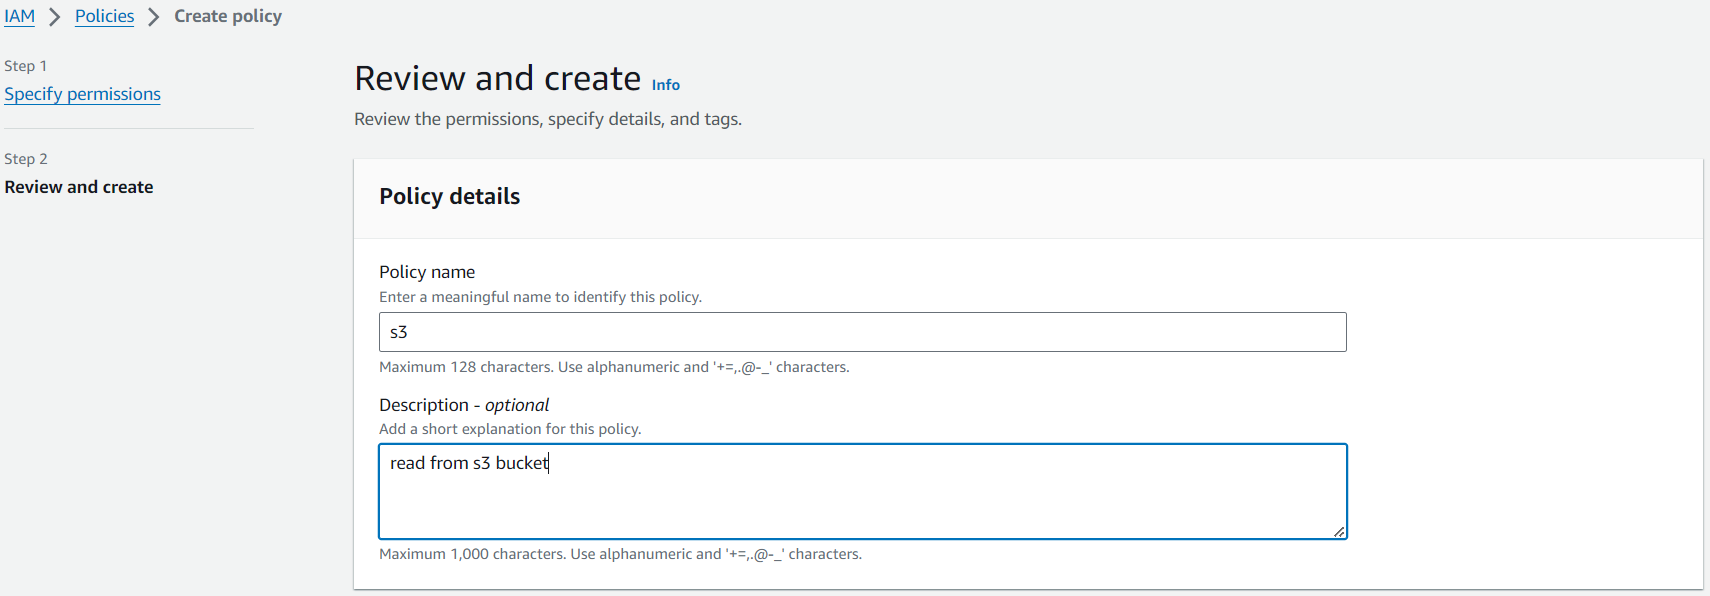 Create new policy form fields